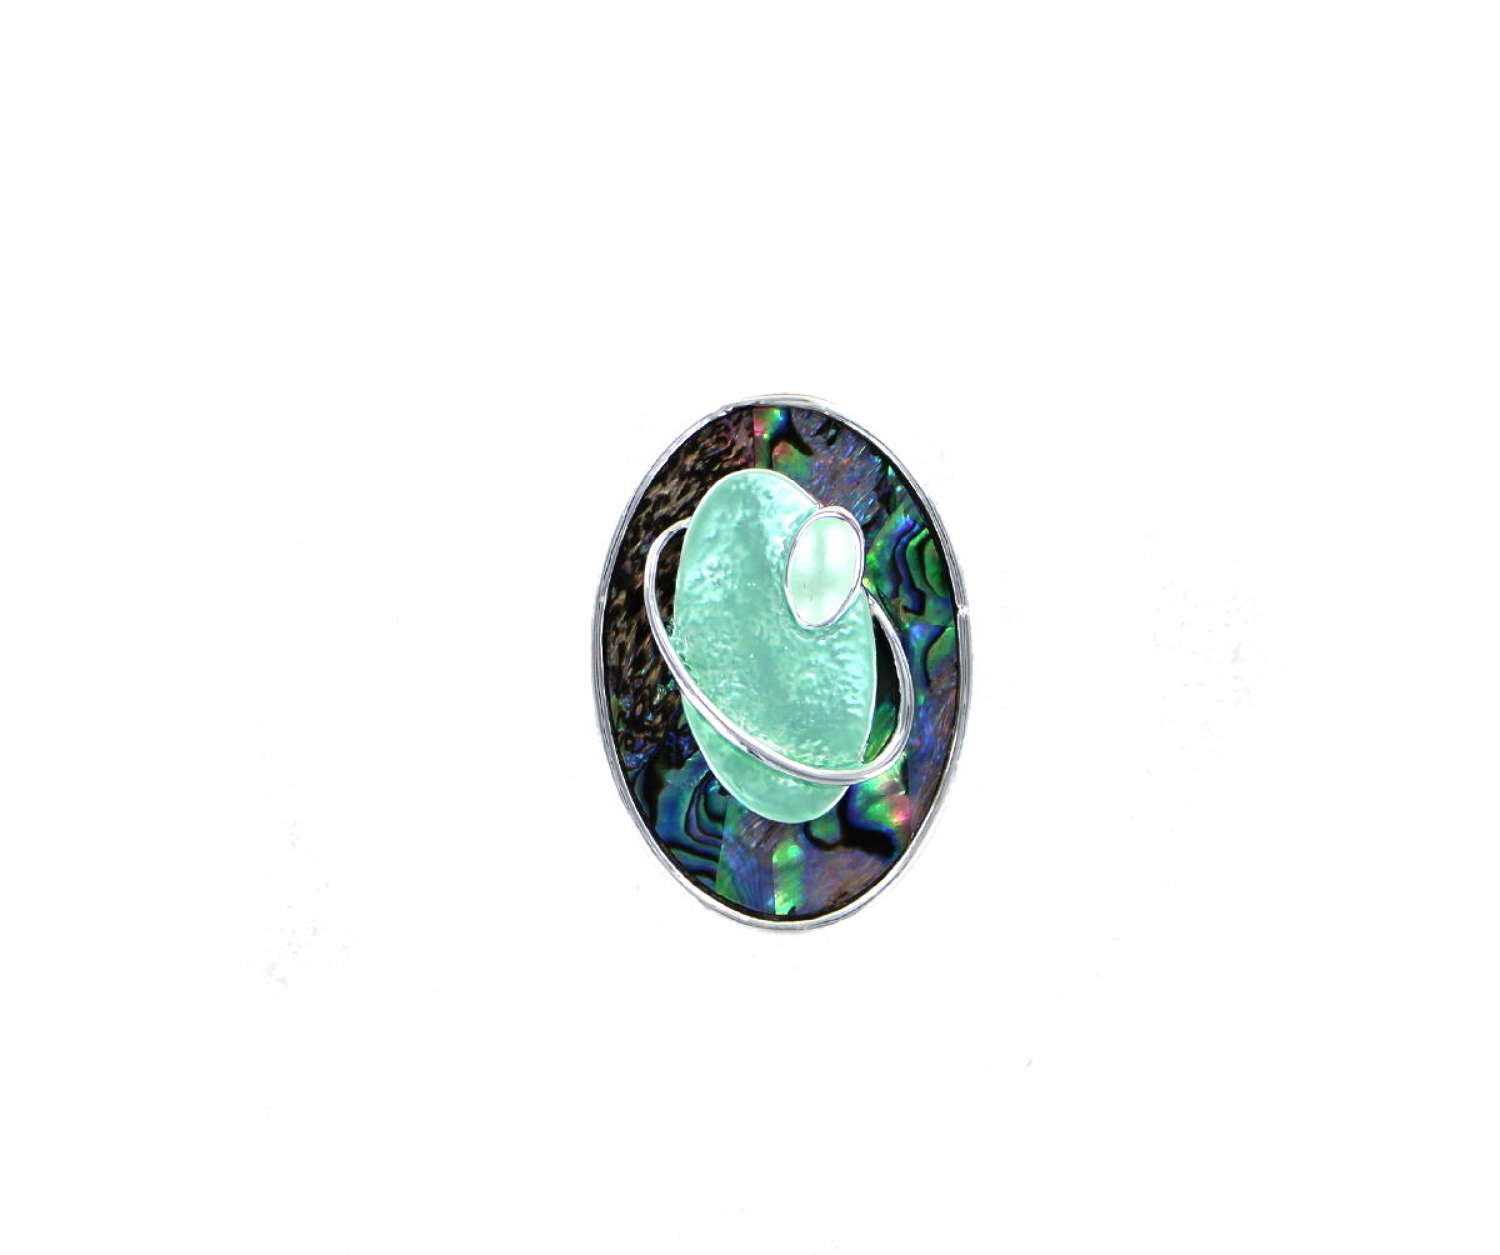 Oval shaped abalone and mint green centre magnetic brooch.